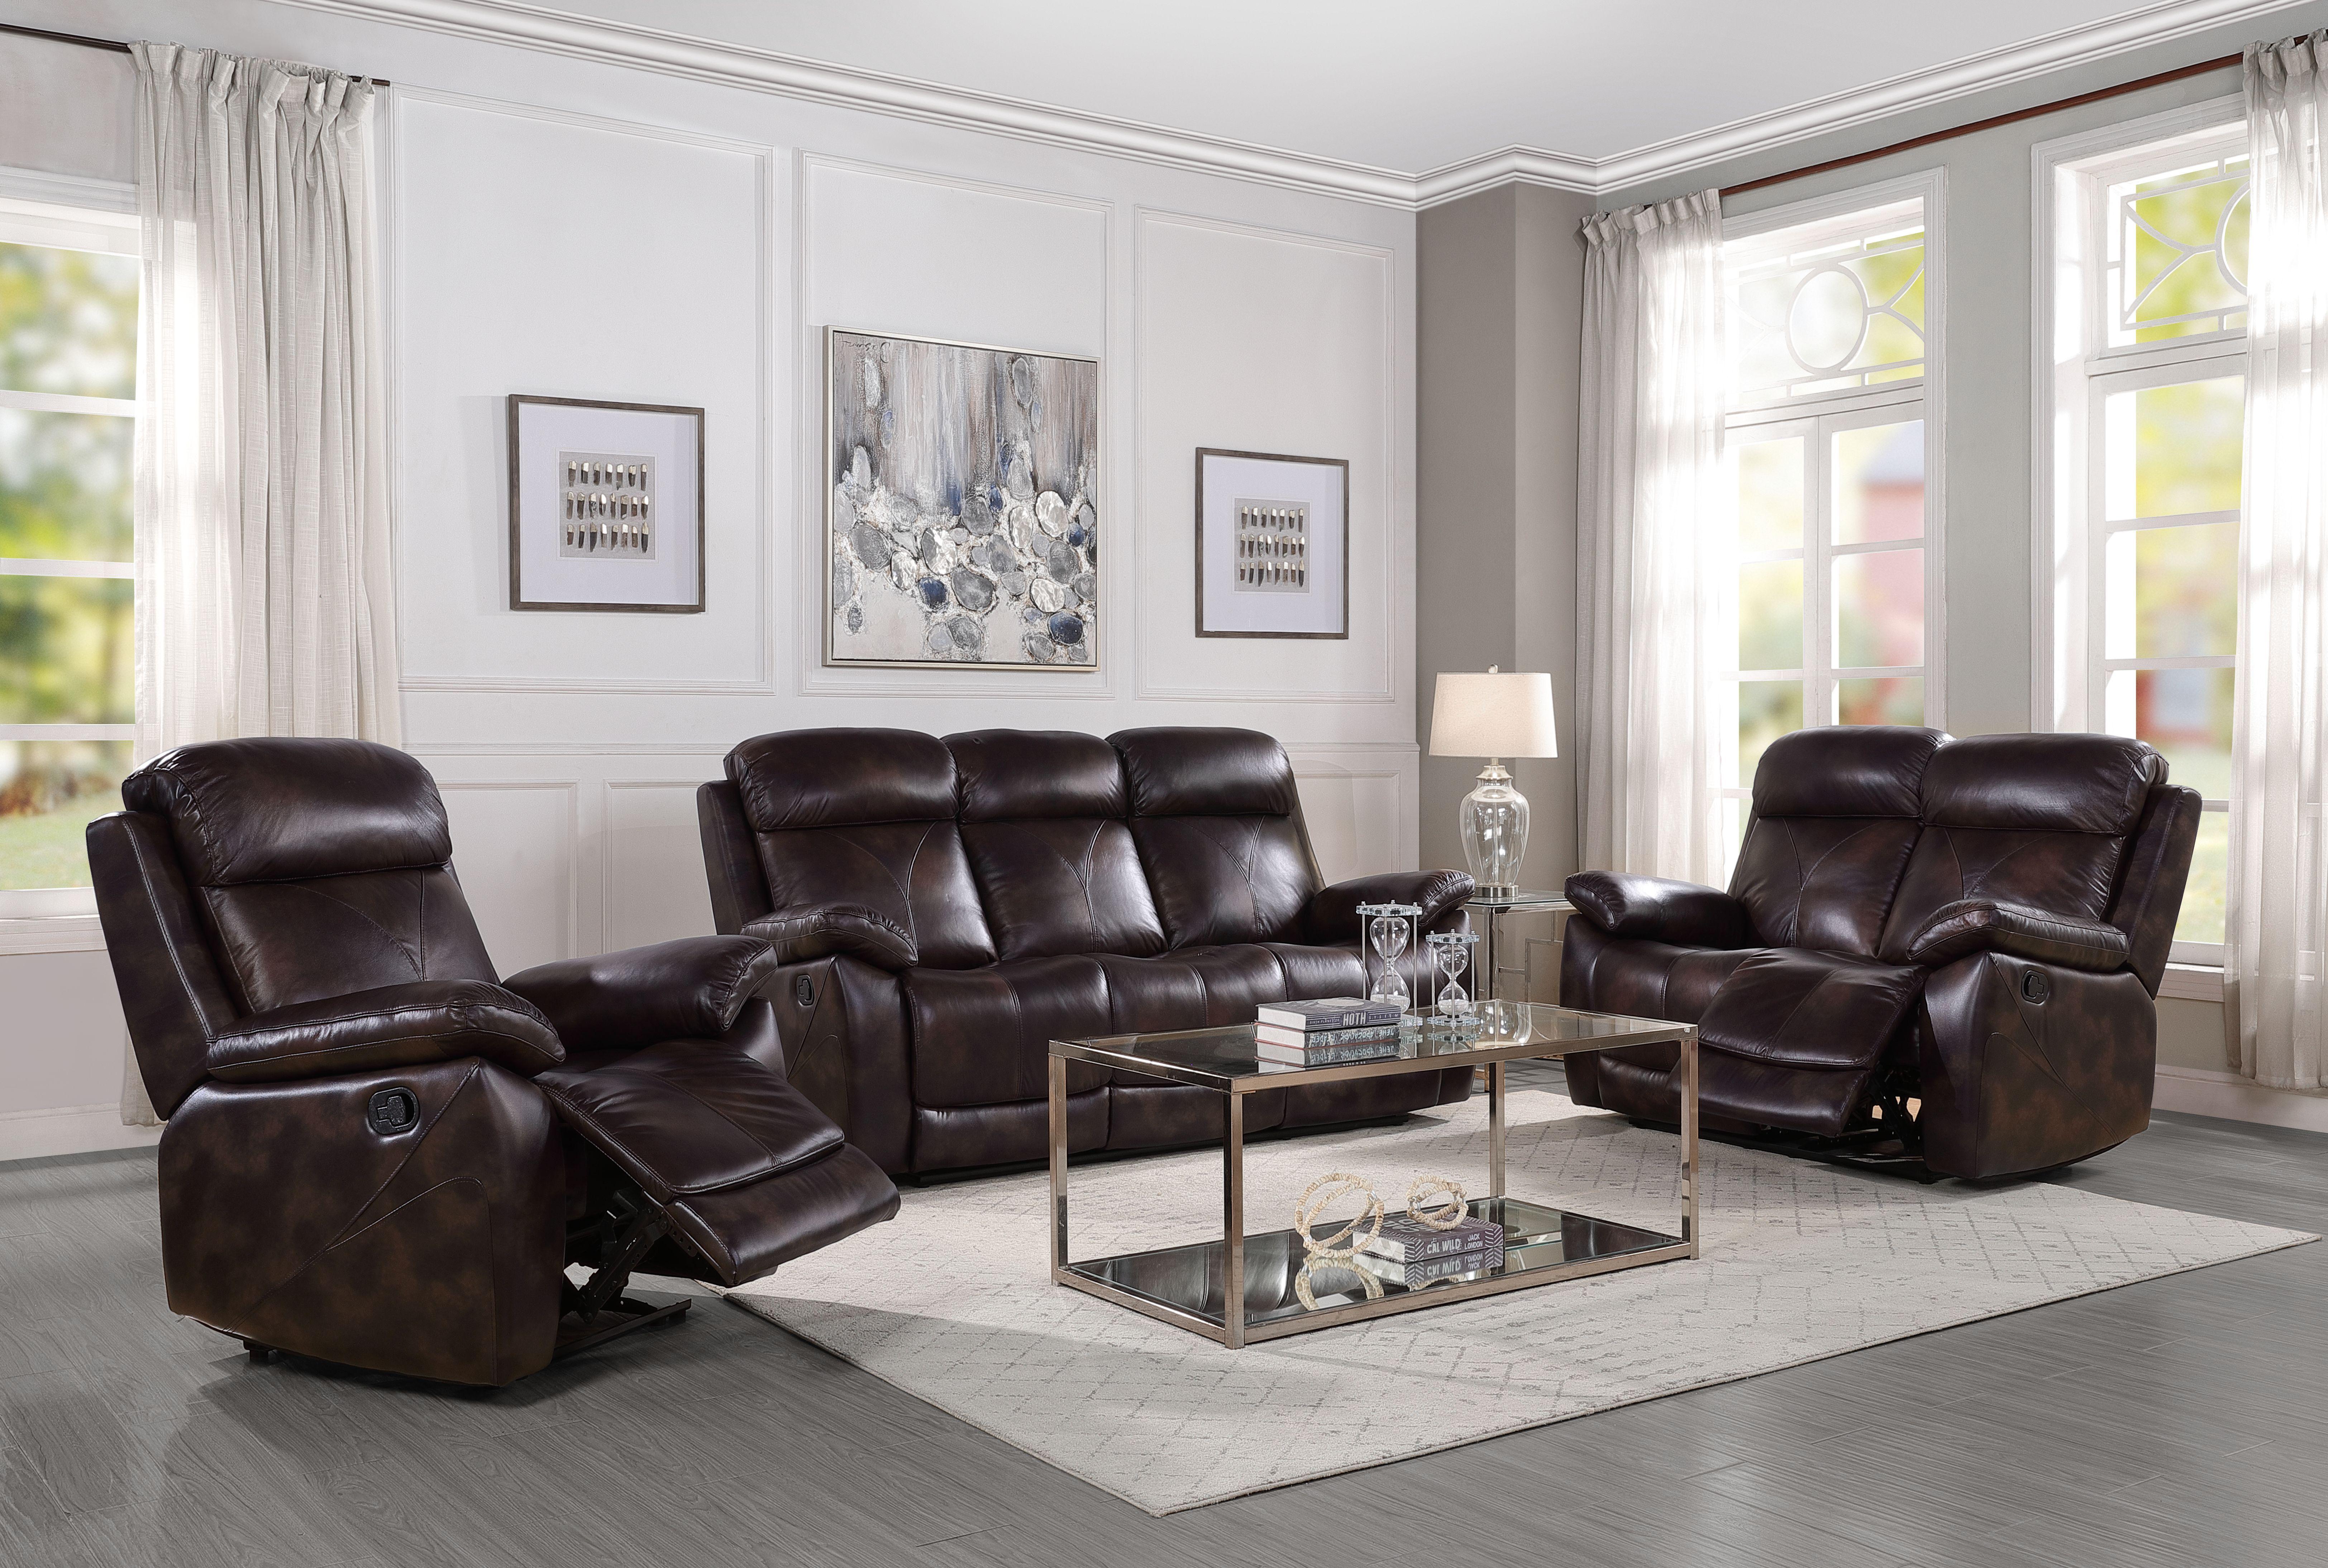 

    
Perfiel Sofa Loveseat and Chair Set
